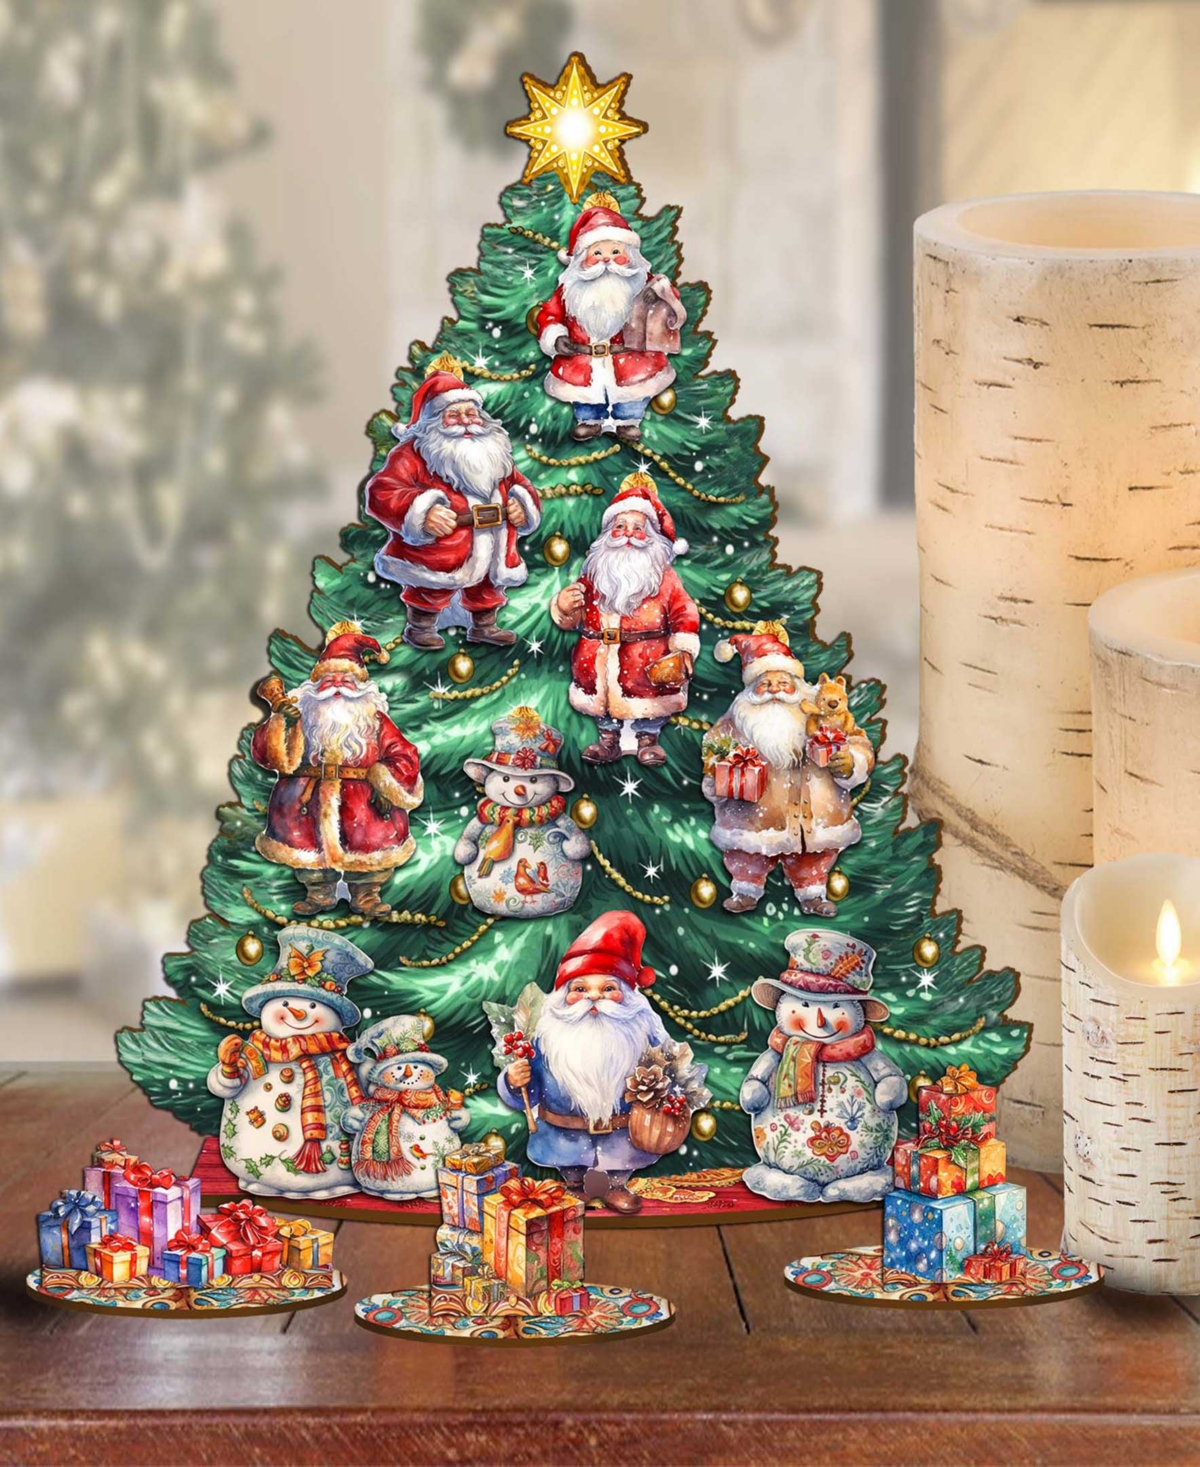 Designocracy Santa Clause Themed Wooden Christmas Tree With Ornaments Set Of 13 G. Debrekht In Multi Color